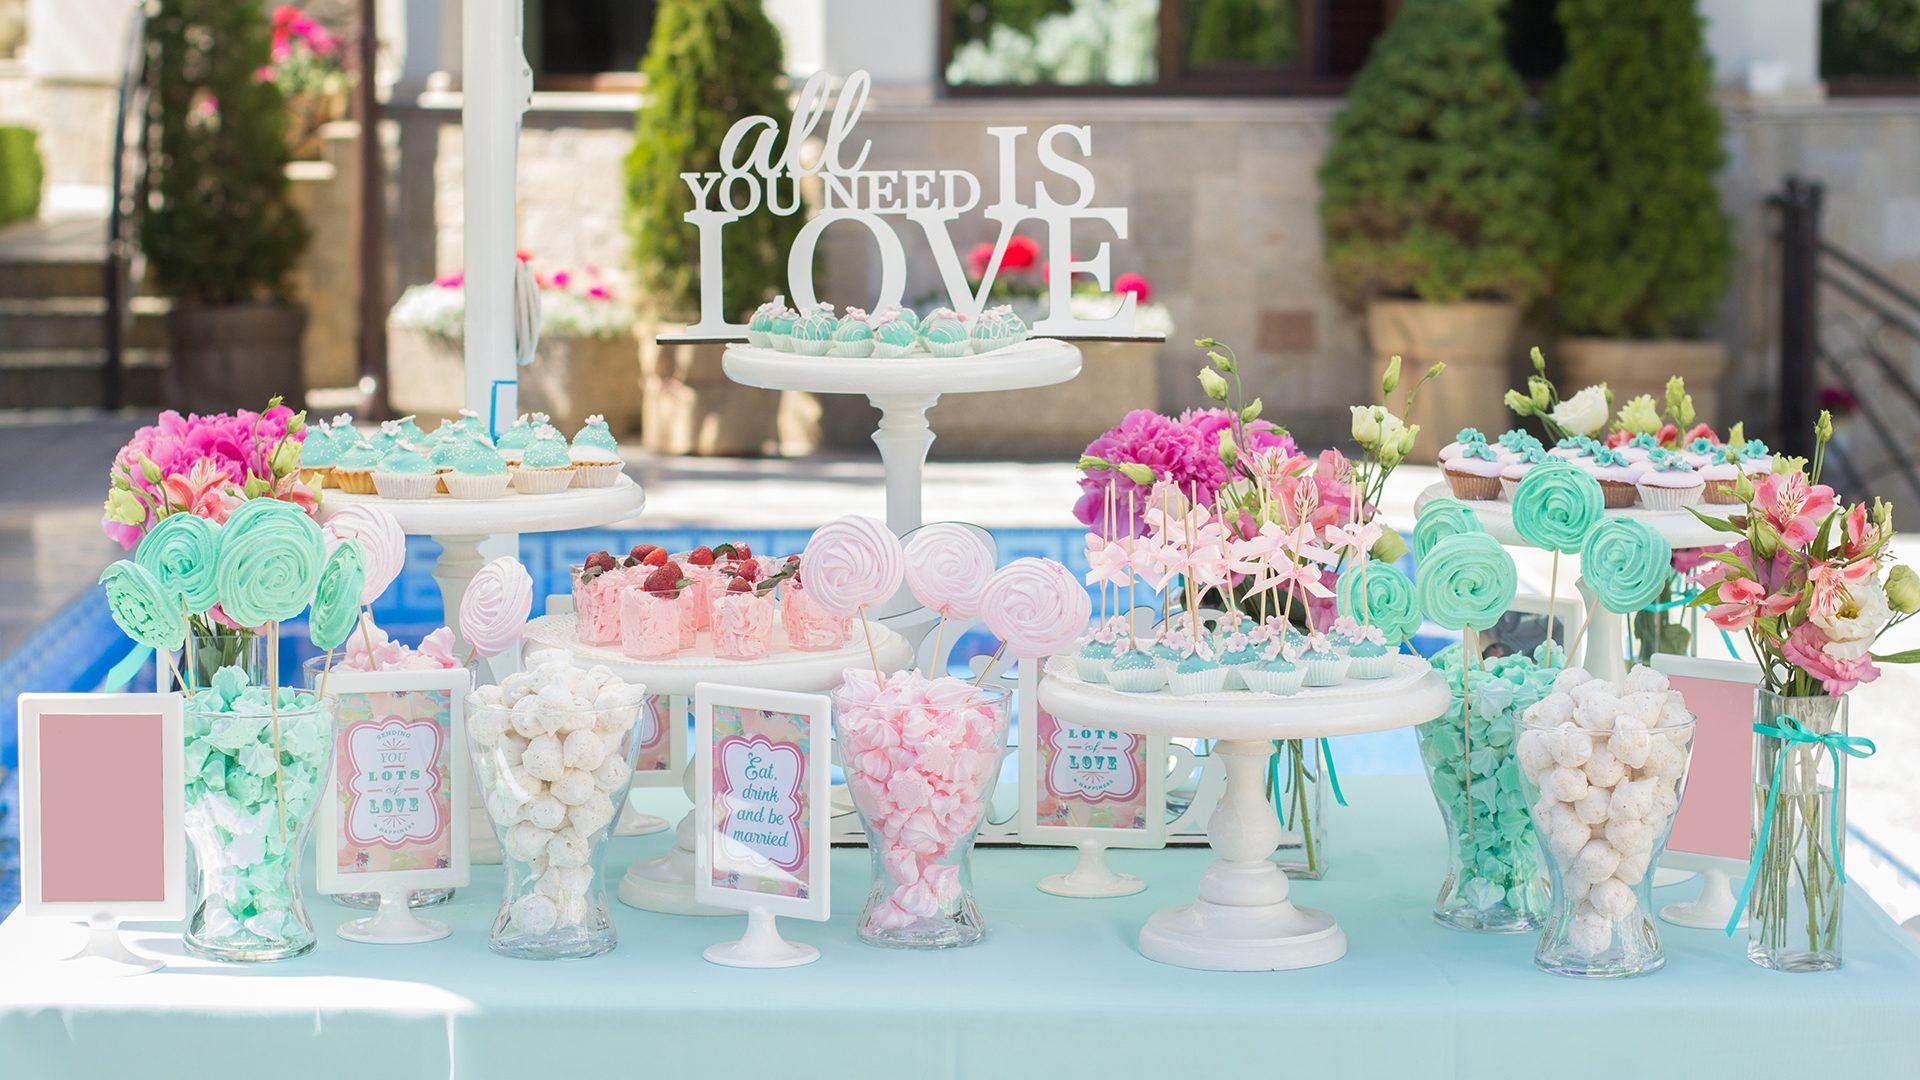 Wedding Candy Favors: A Comprehensive Guide to Ideas & Tips